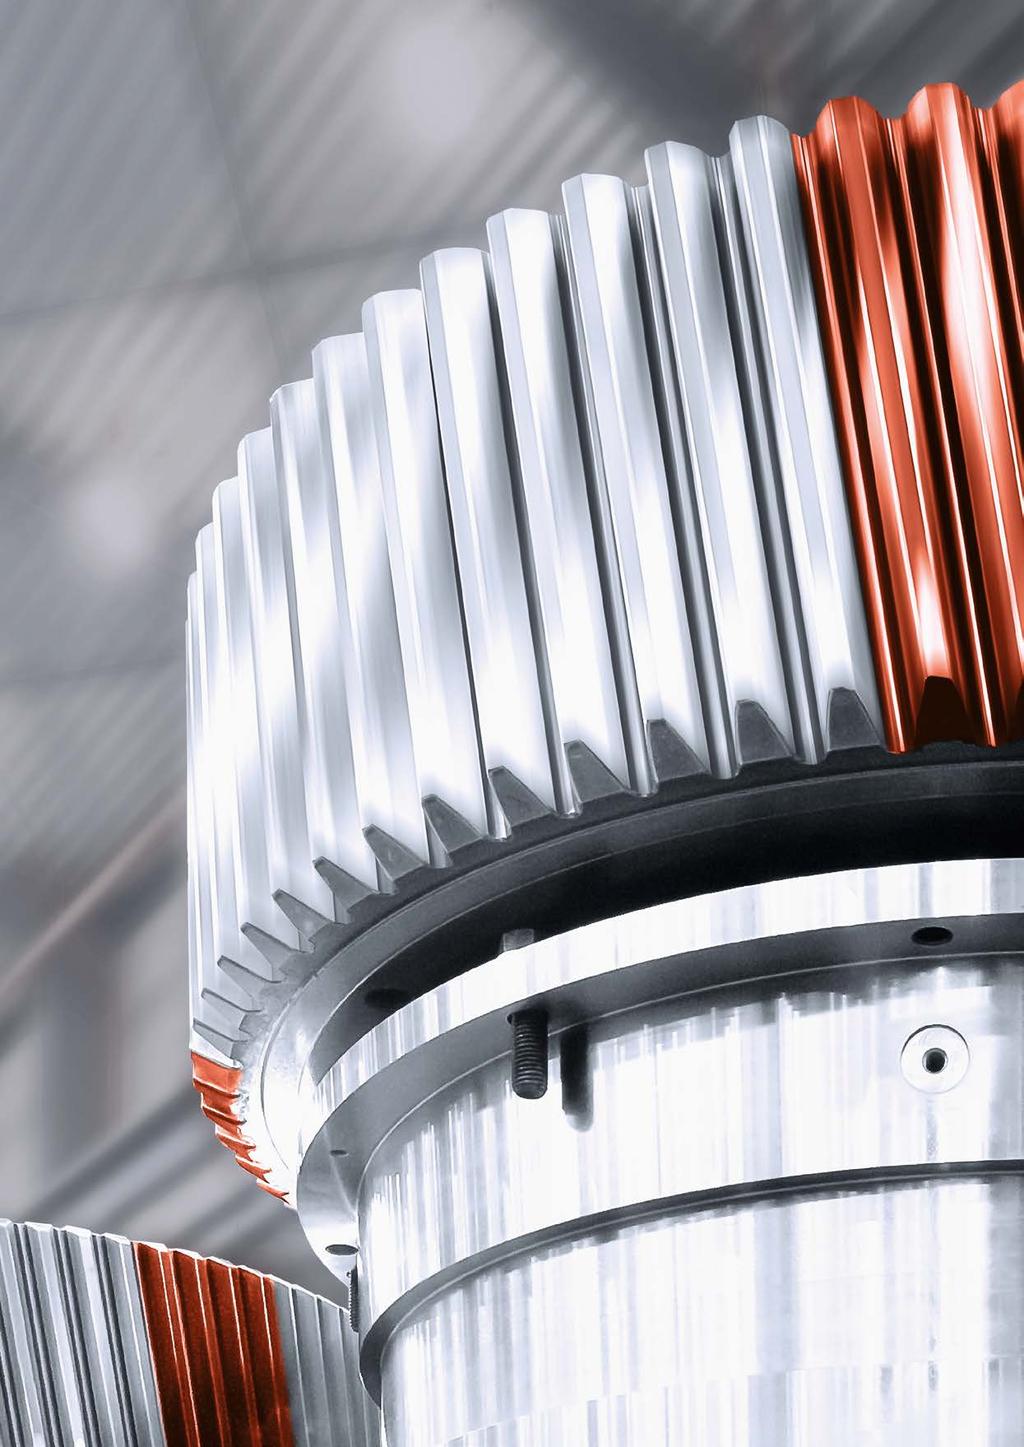 RENK provides pioneering work for wind turbine gearboxes.